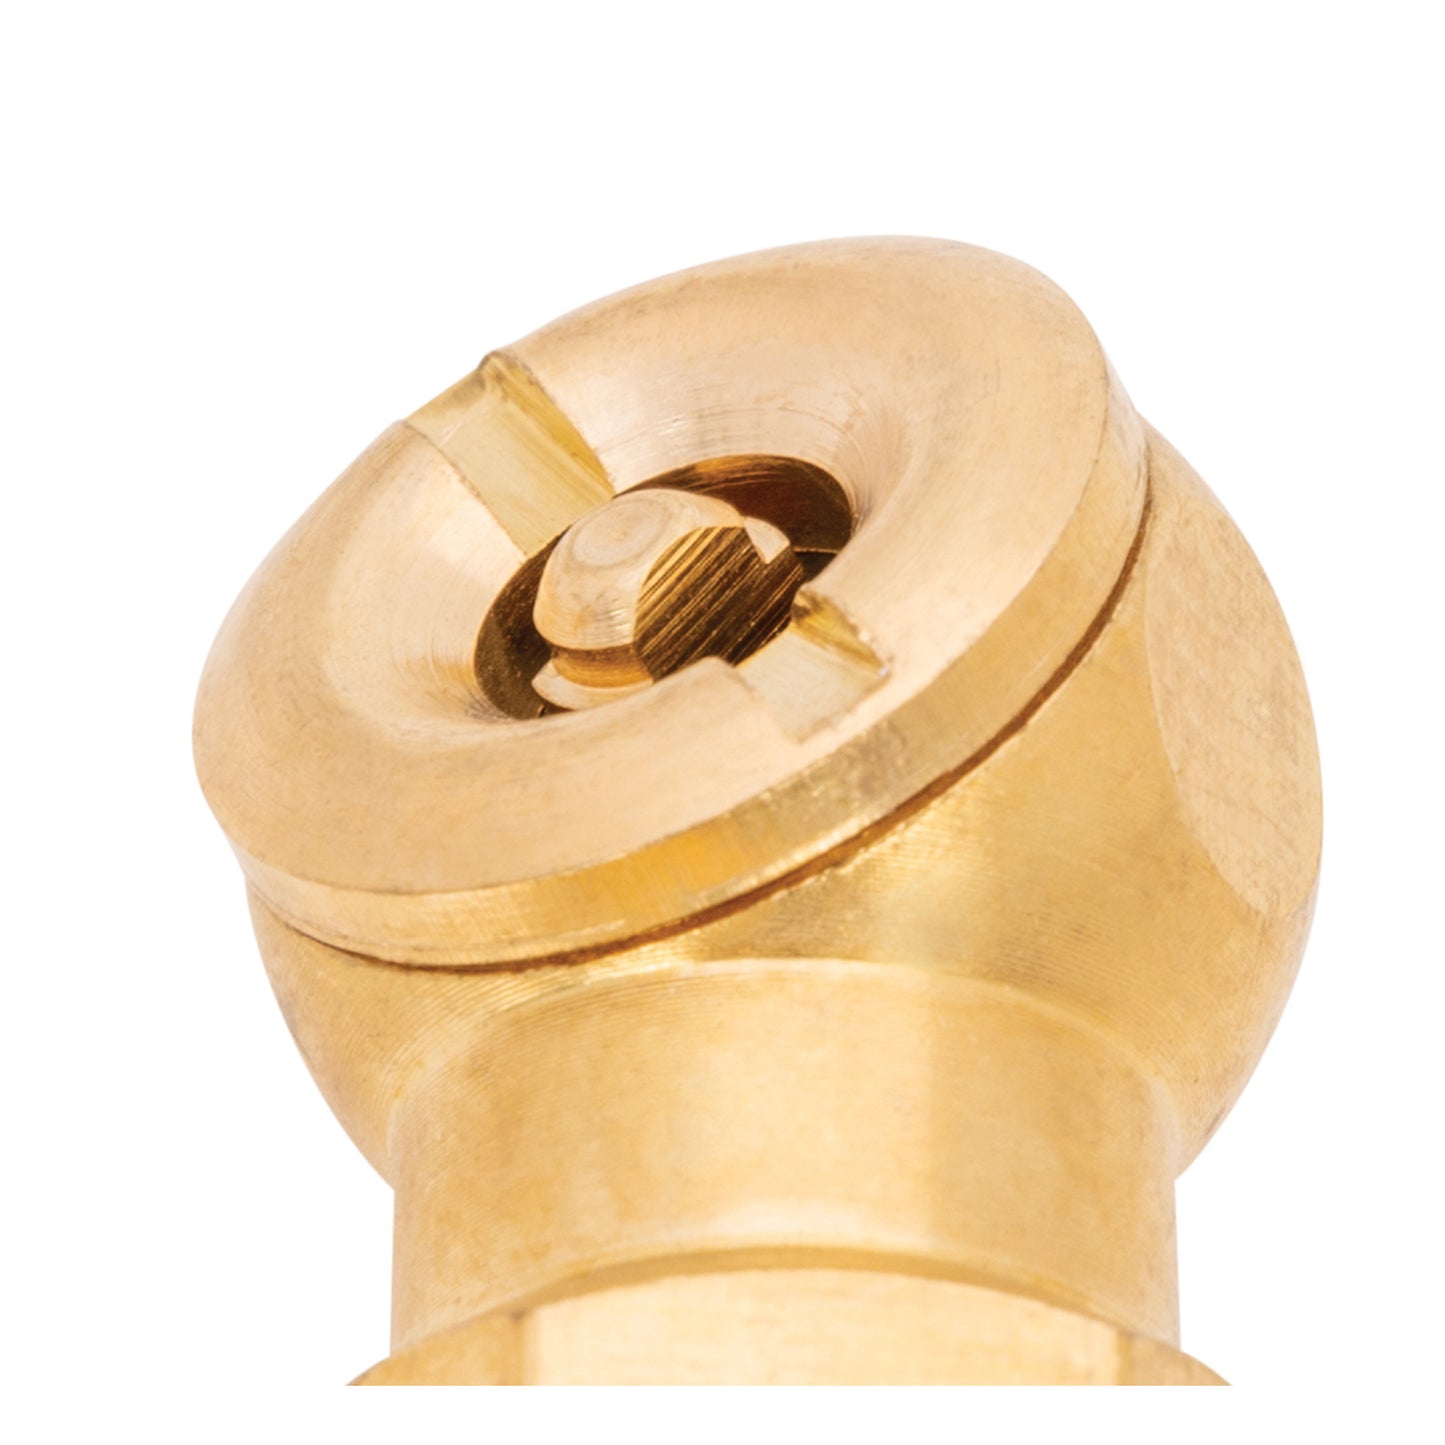 Angled Push-On Brass Ball Foot Air Chuck with 1/4-Inch NPT Thread